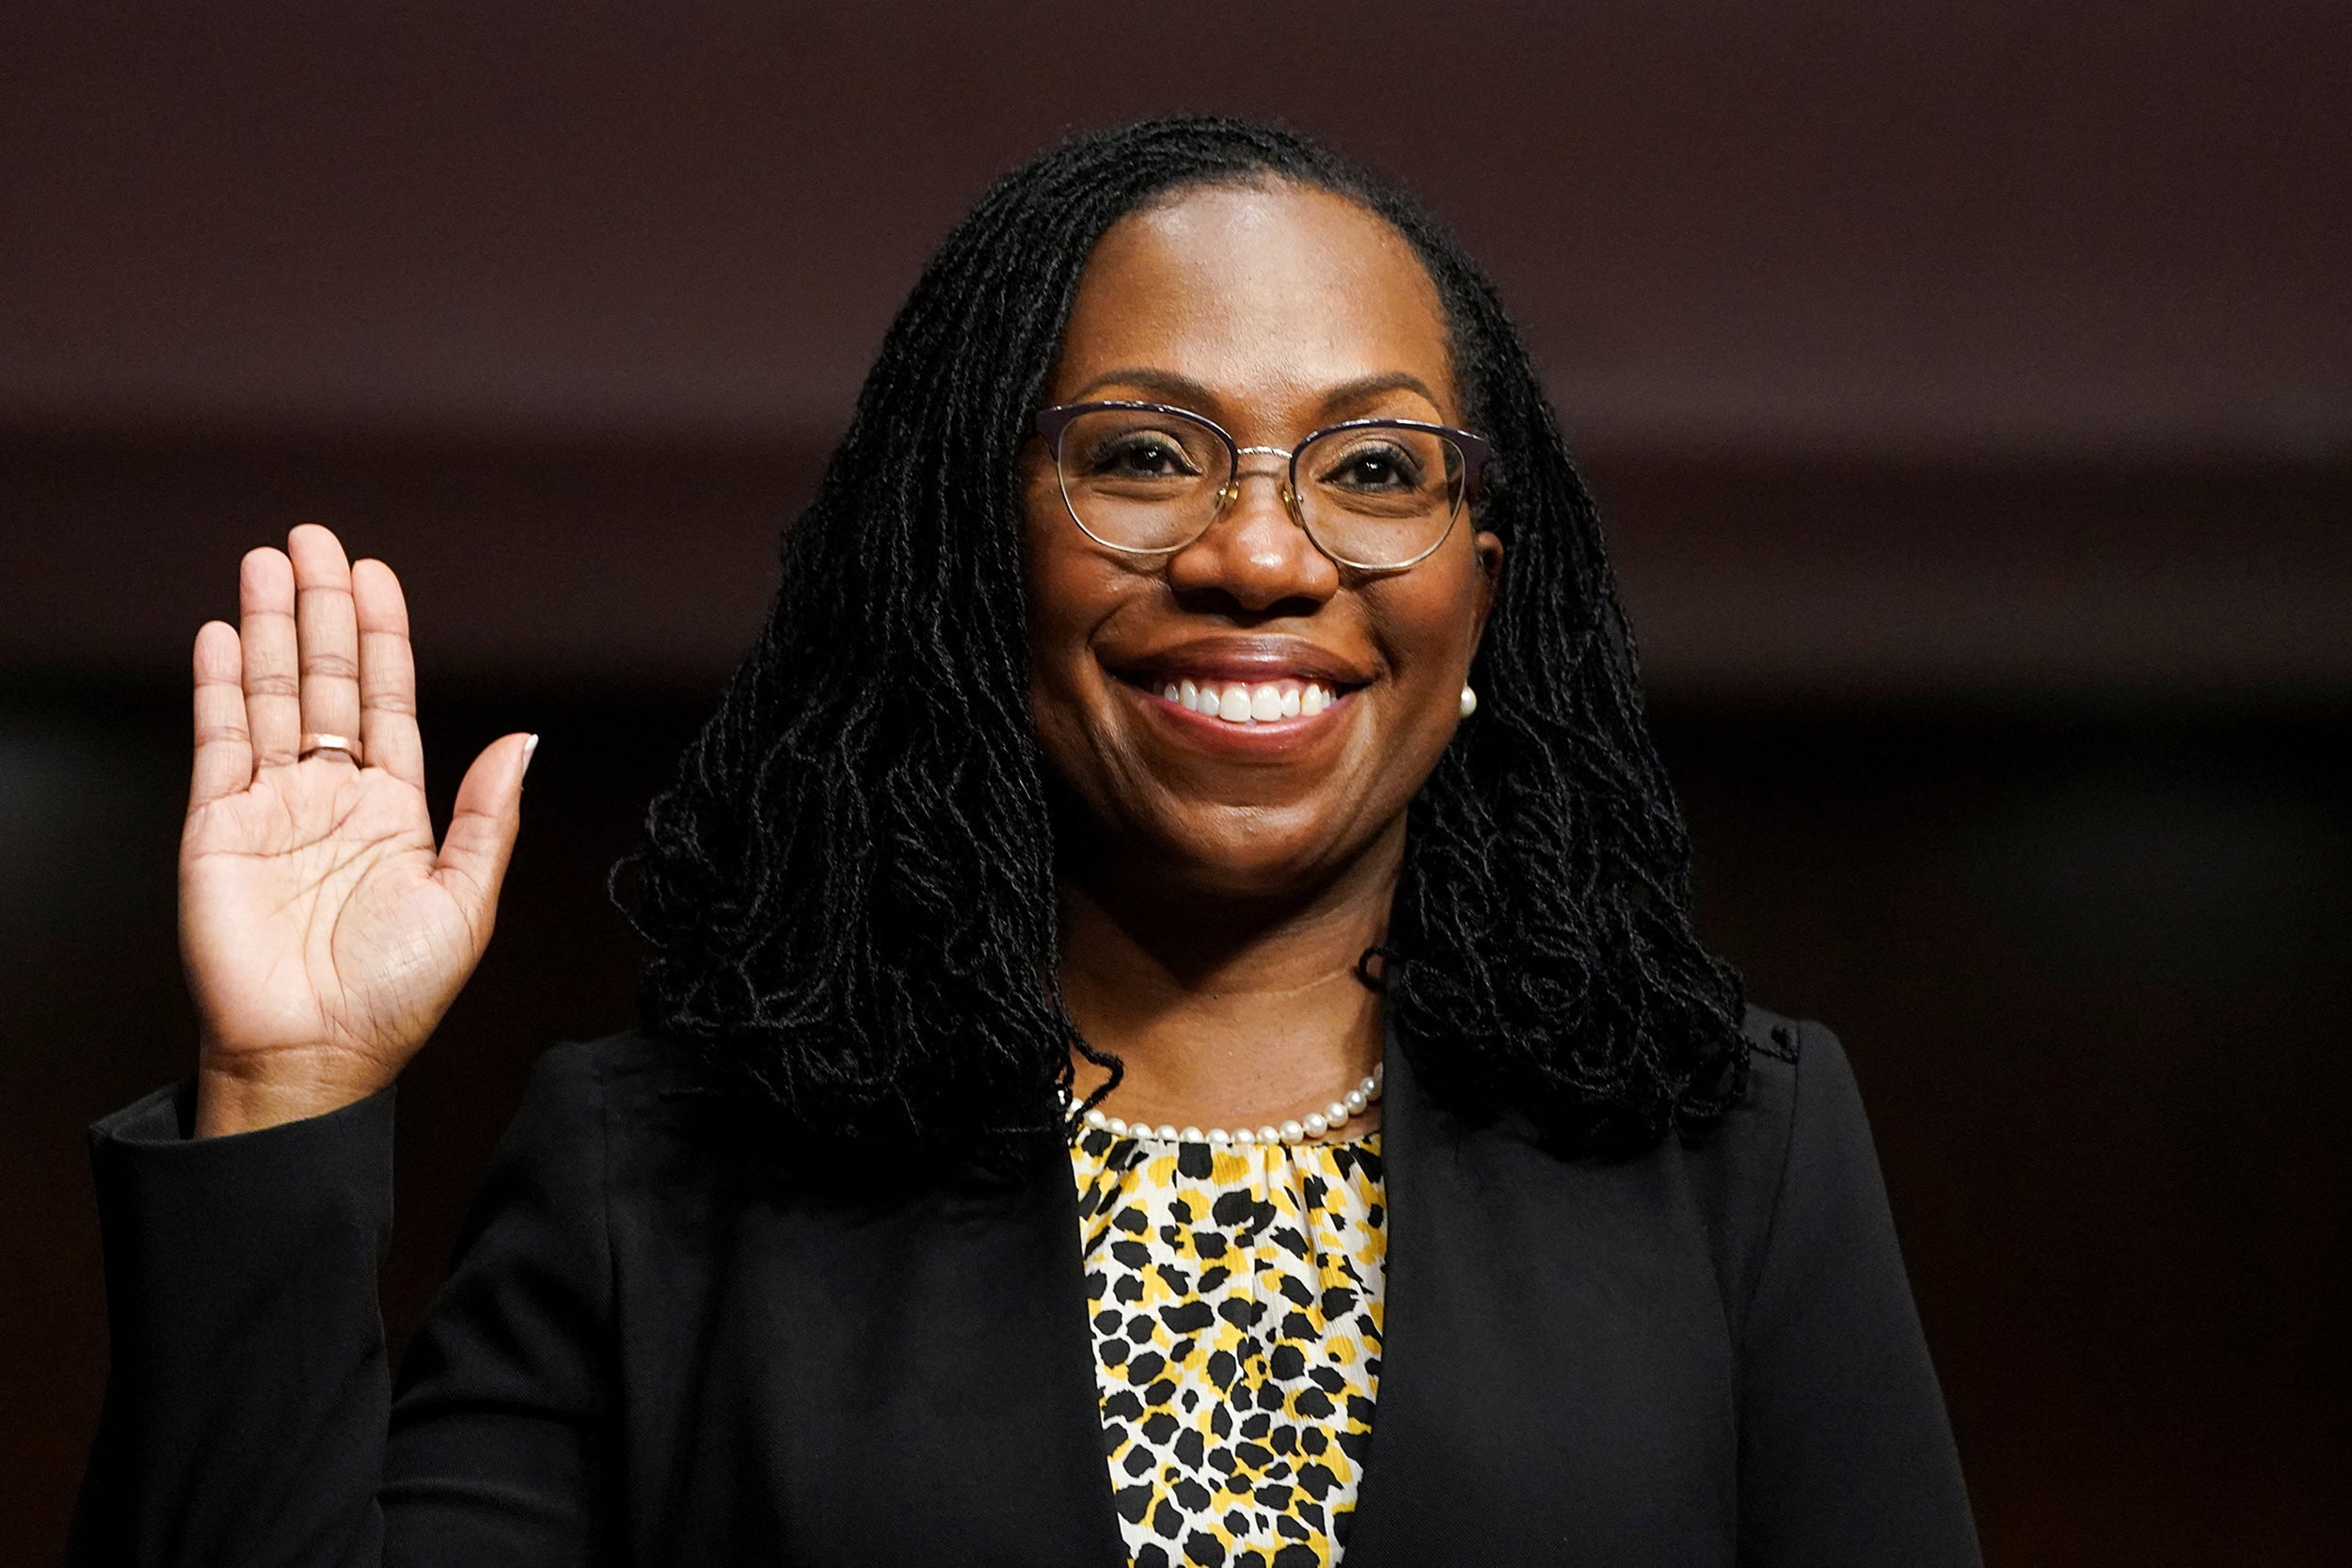 Judge Ketanji Brown Jackson may be the first black woman appointed to the U.S. Supreme Court.